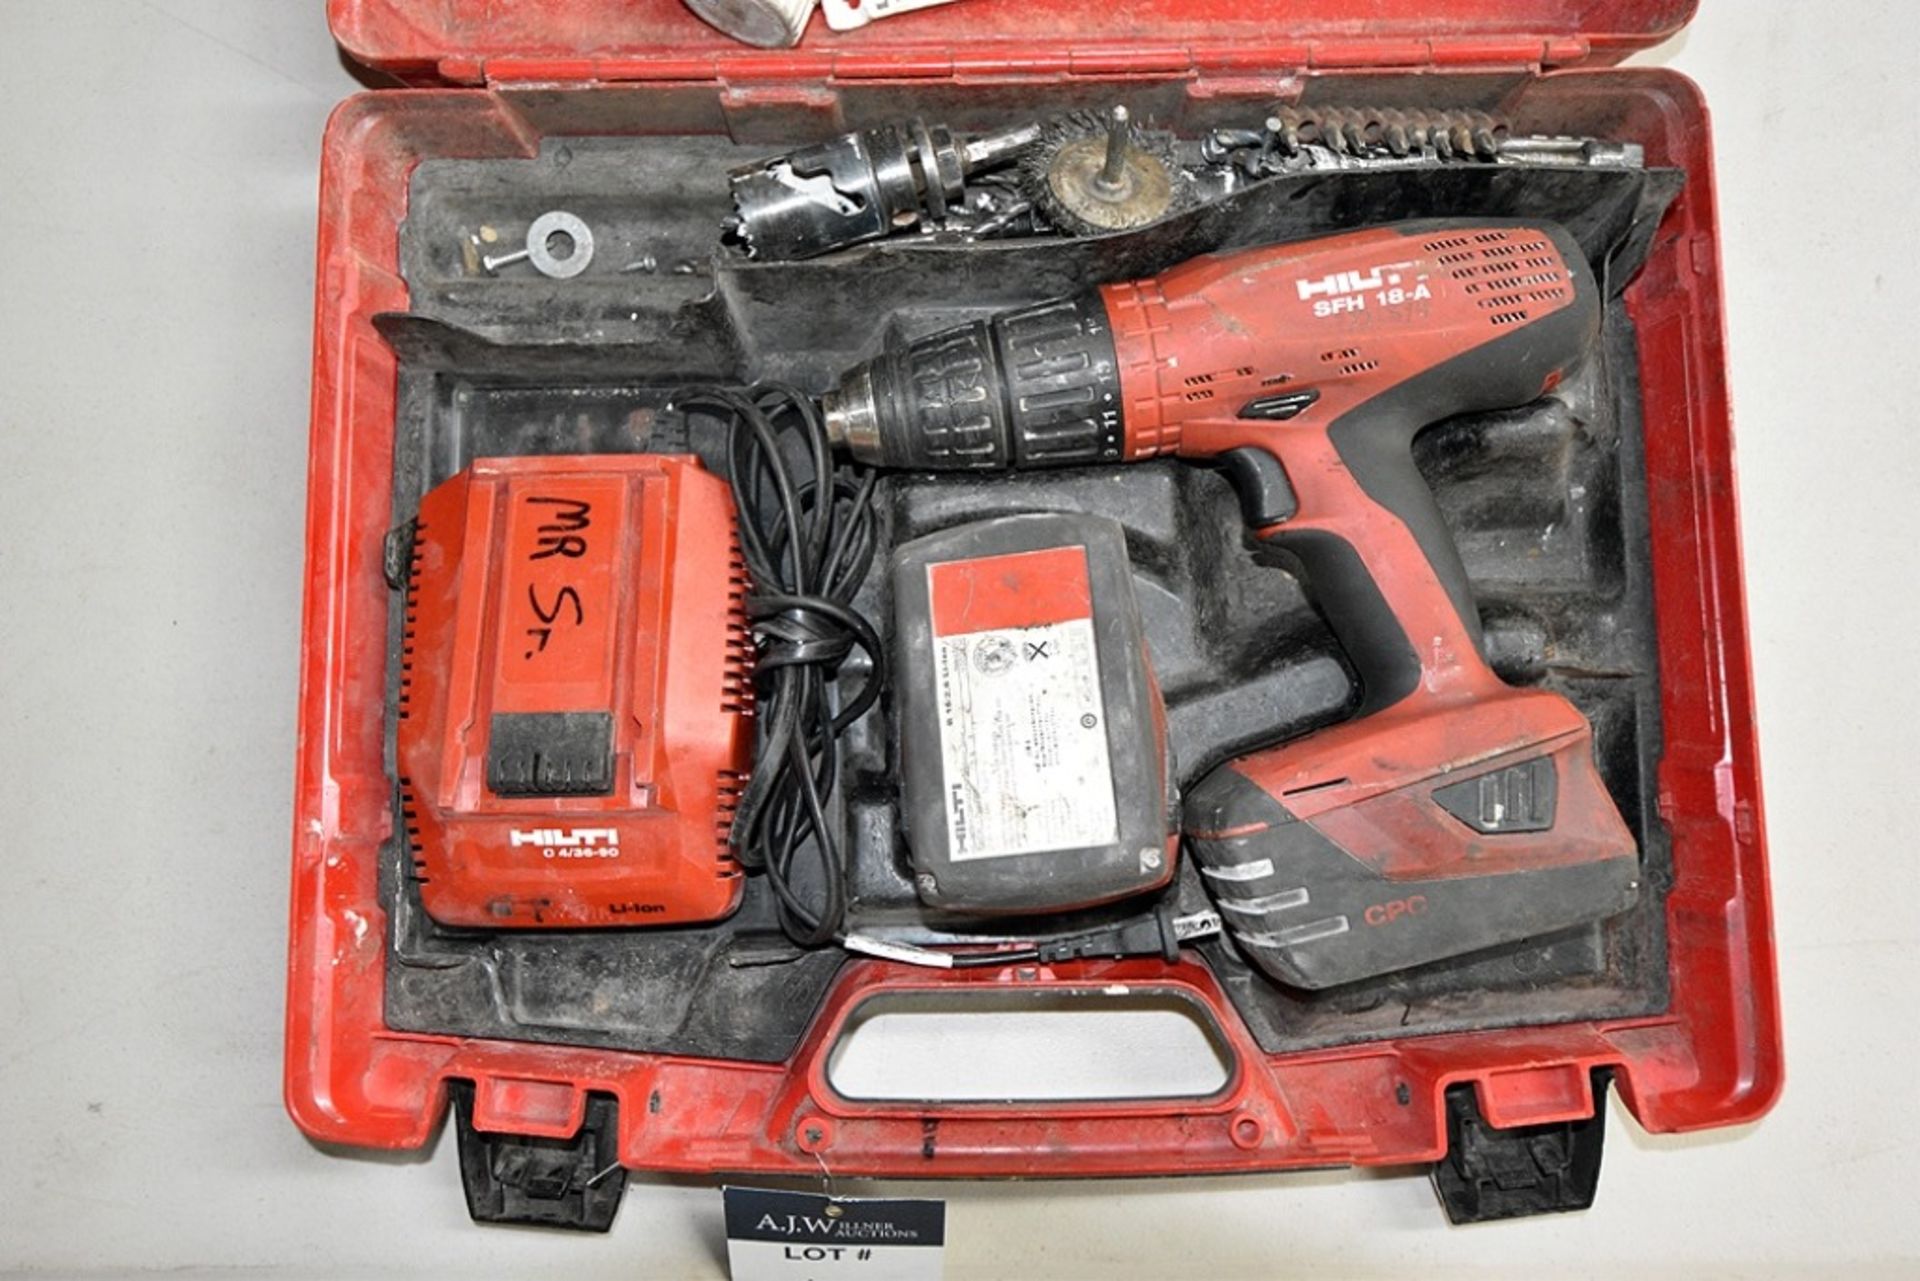 Hilti SFH18-A Cordless Driver w/ (2) 18v Lithium Ion 3.3Ah Battery w/ Charger and Case - Image 2 of 3